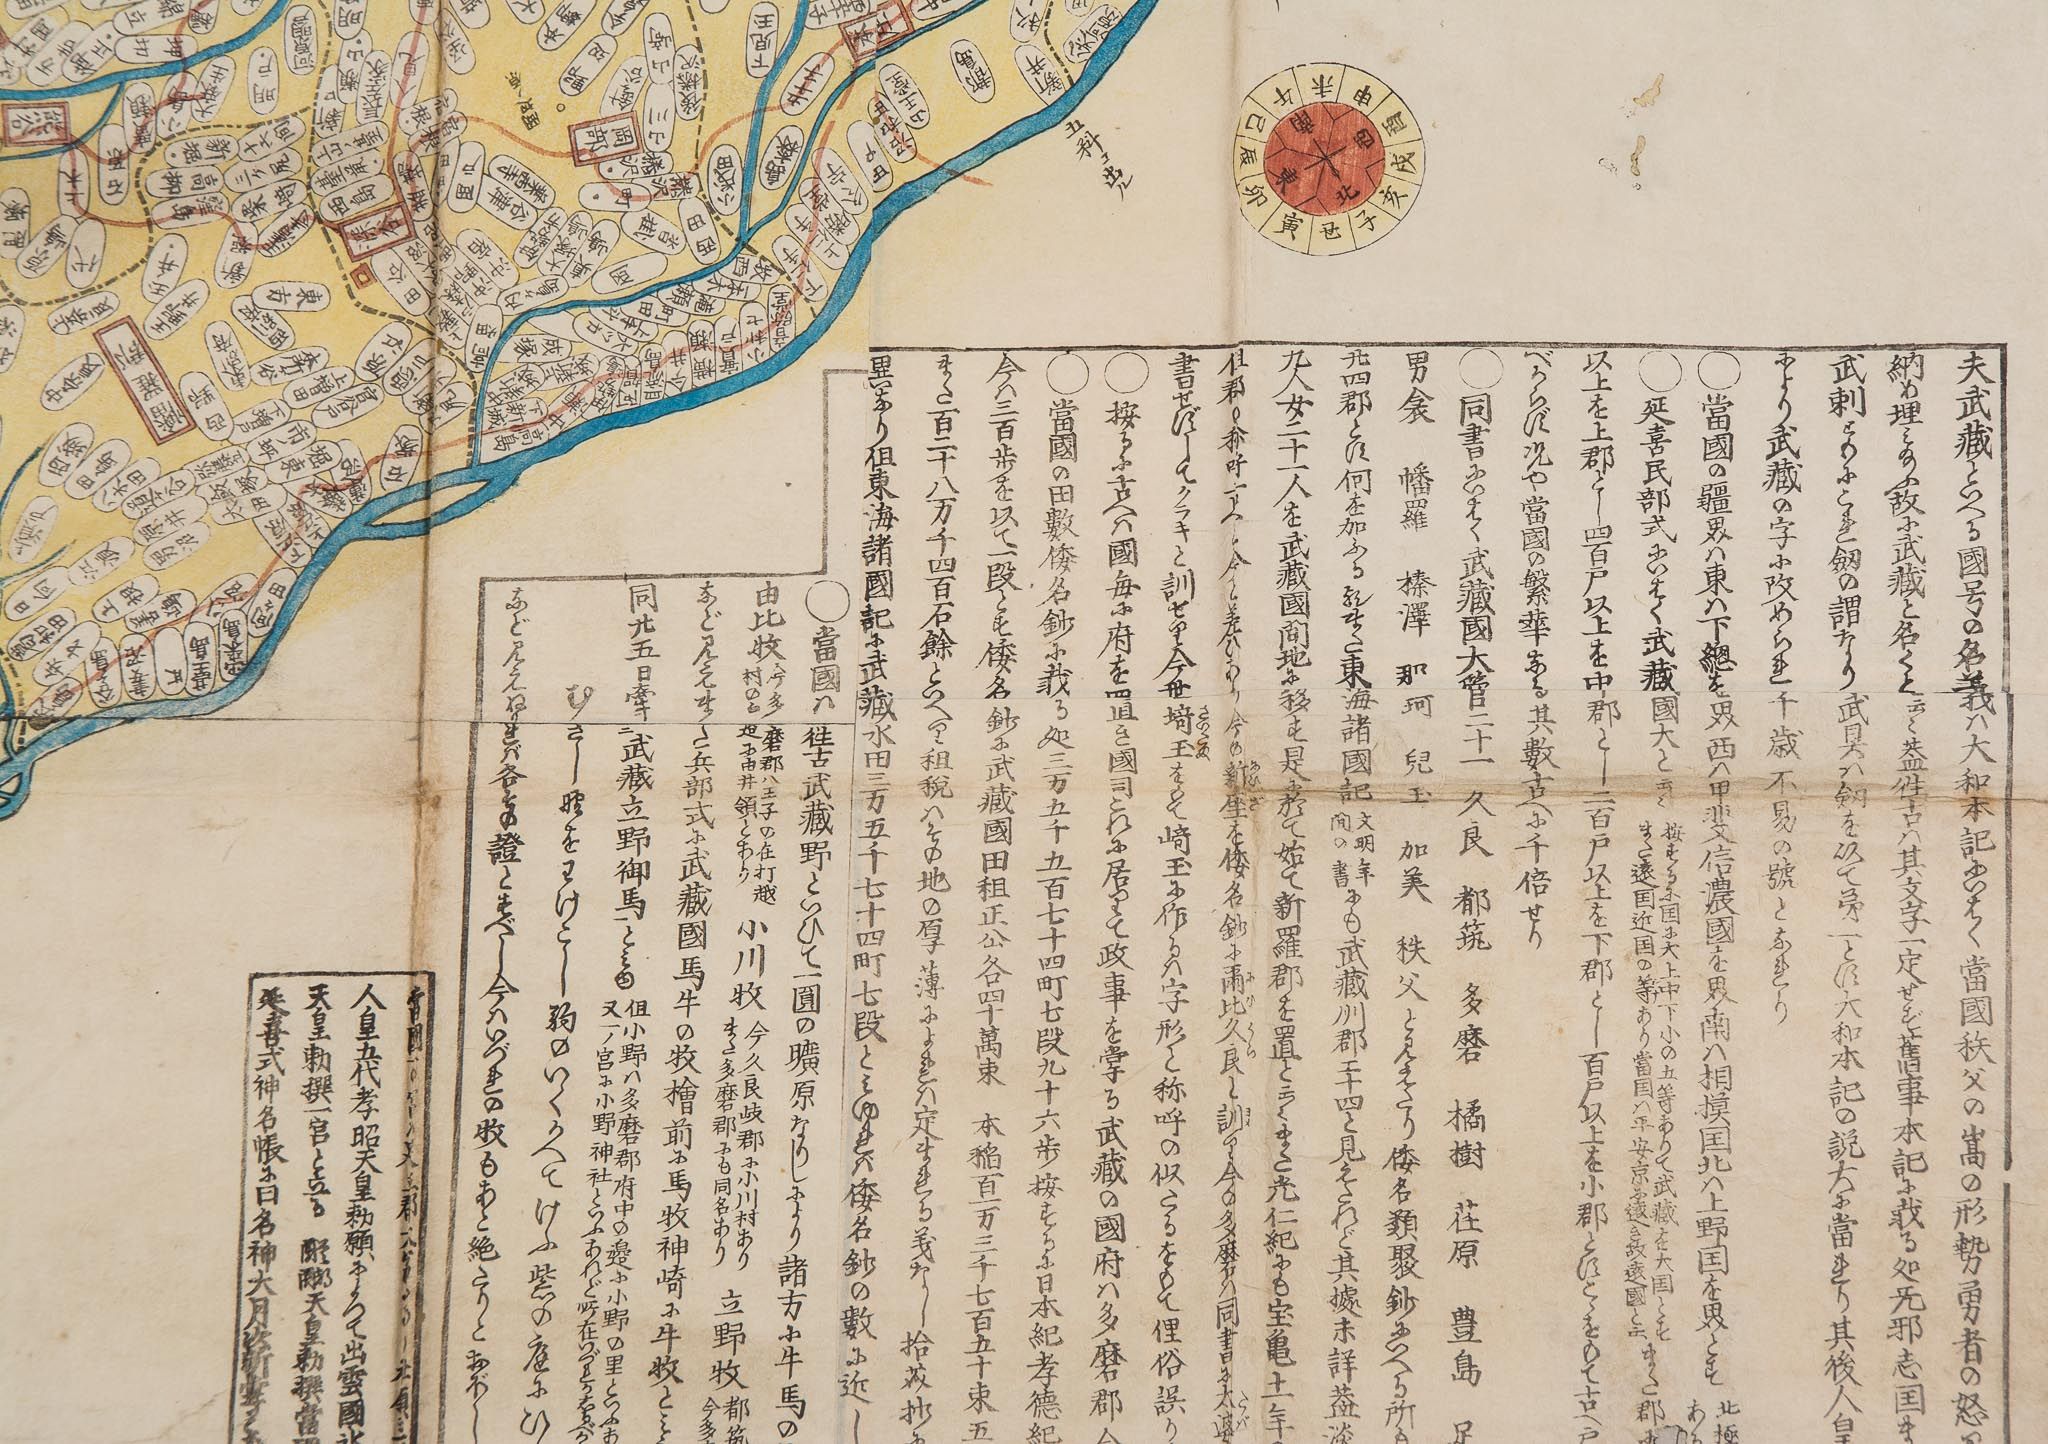 Ino (Tadataka) - A large map of Musashi province, showing Edo, or Tokyo, with extensive text - Image 6 of 6